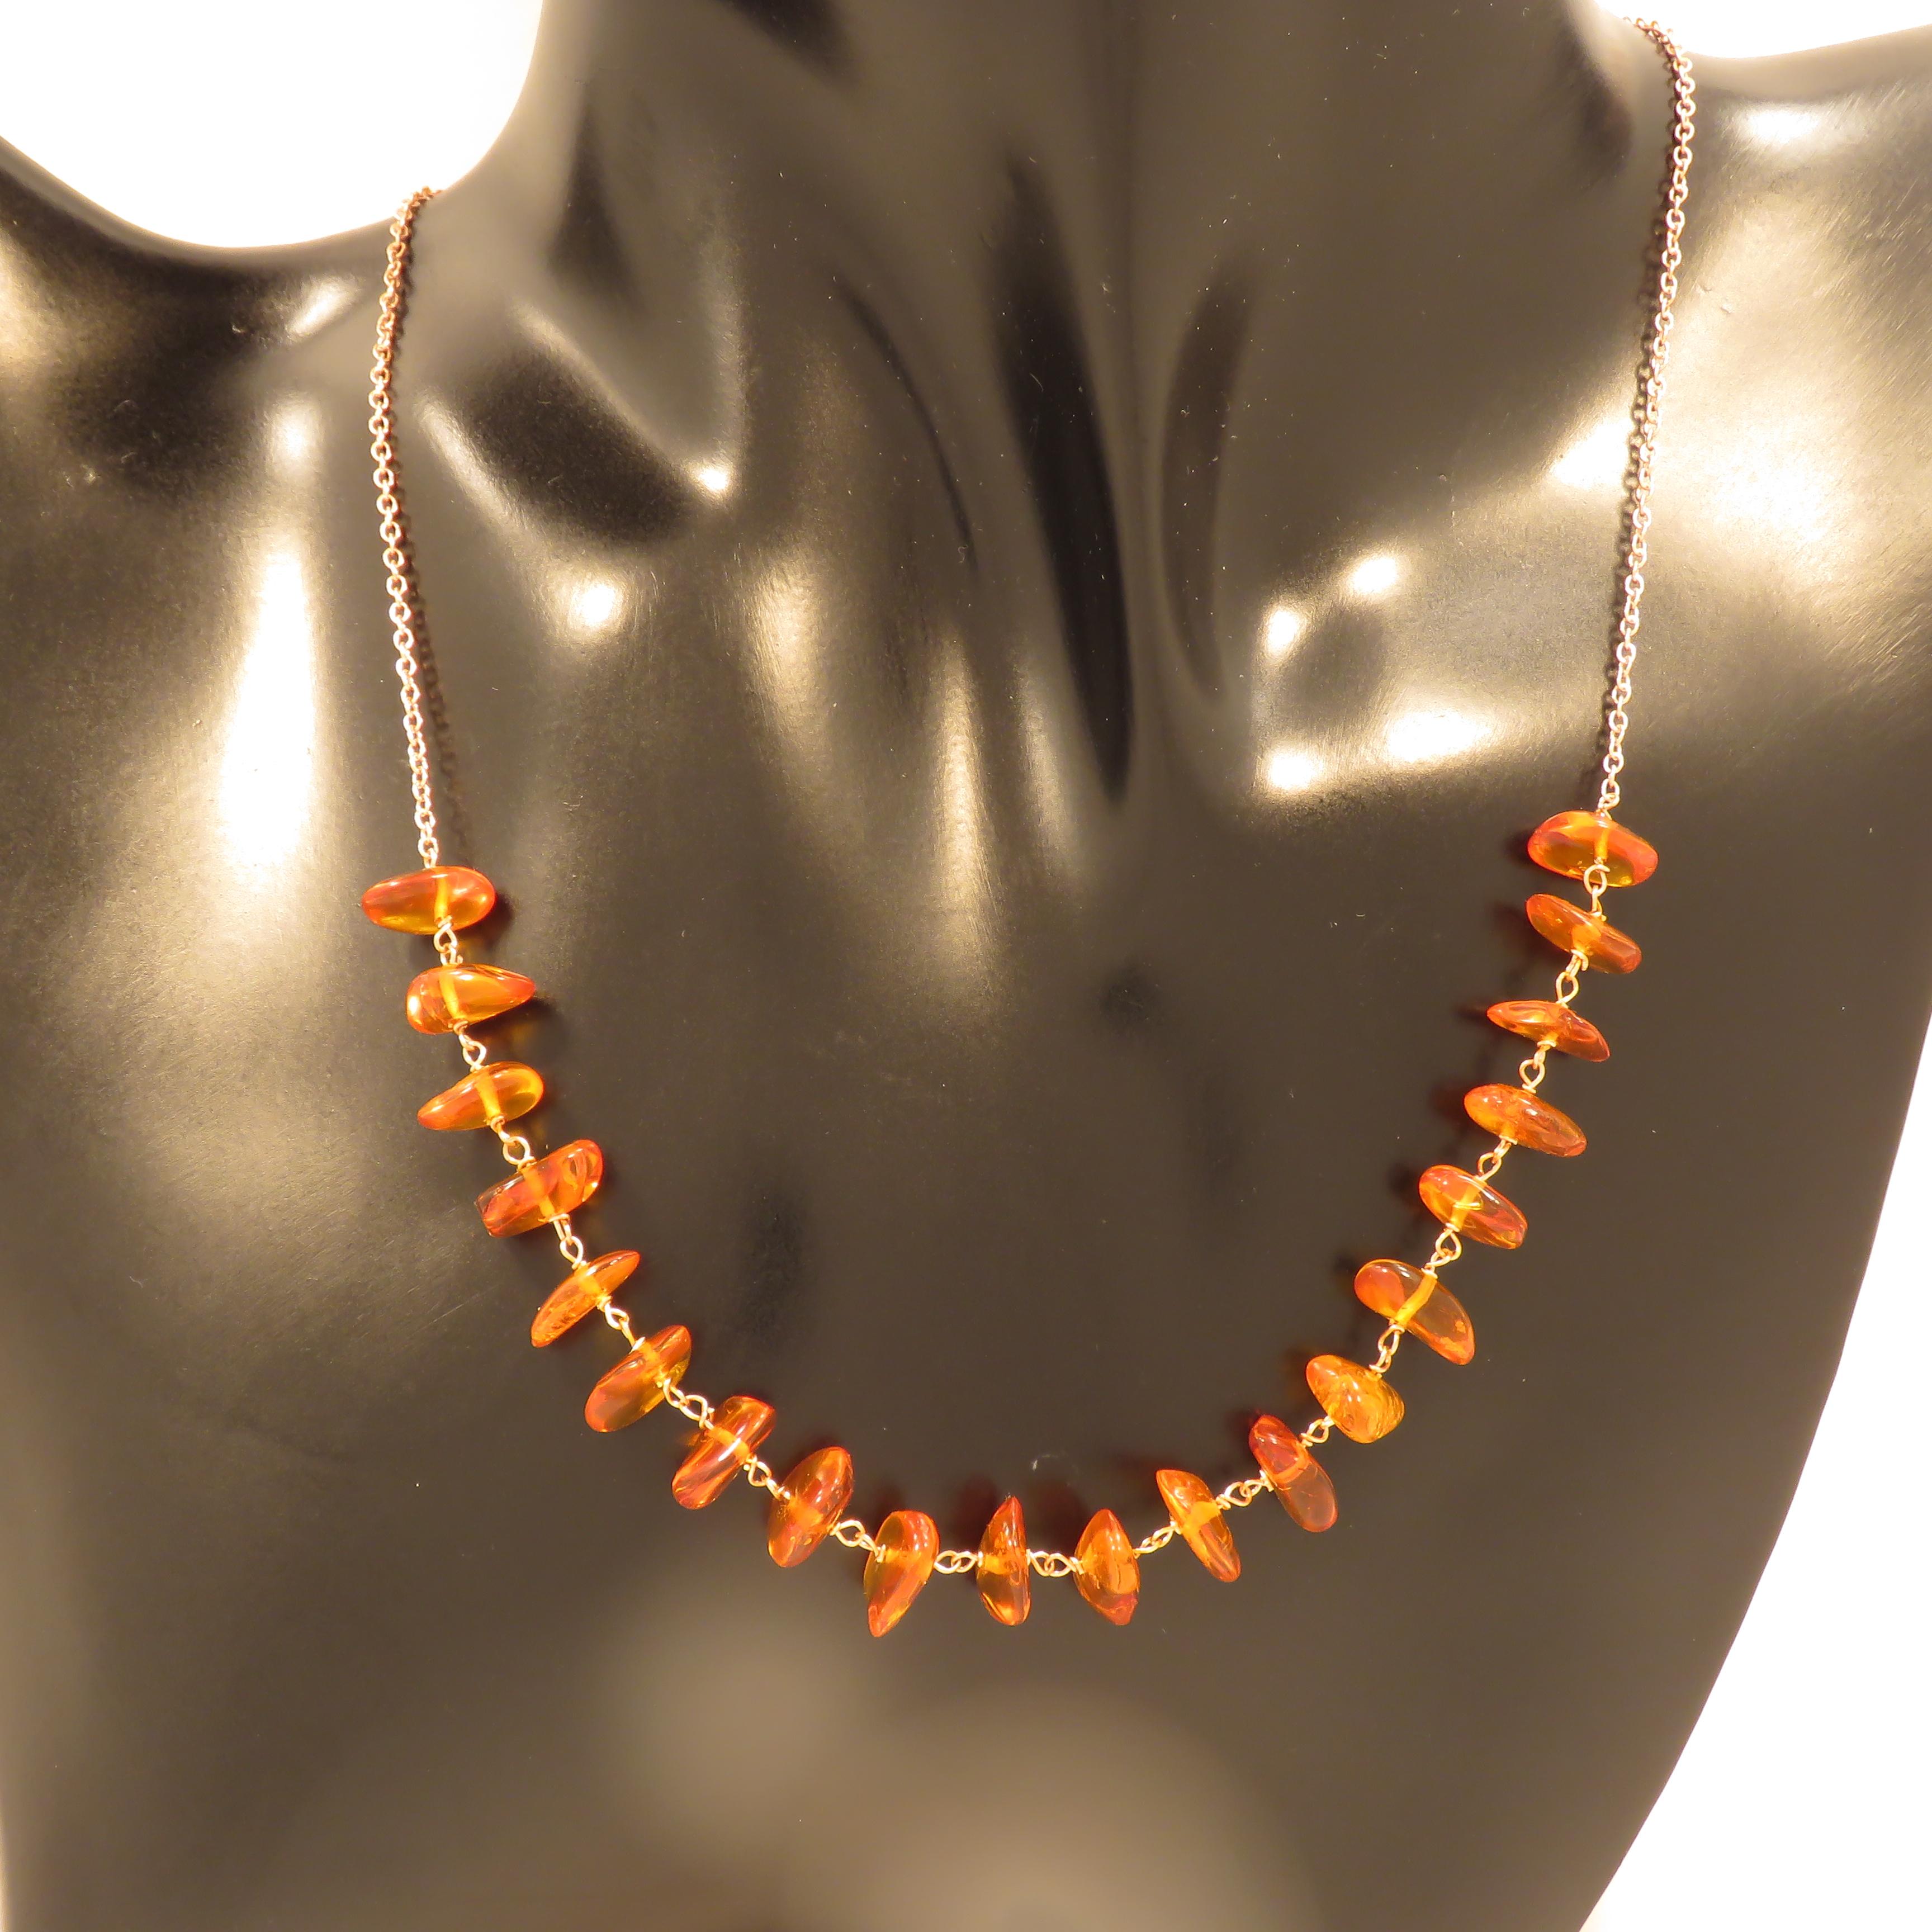 Beautiful necklace with genuine yellow honey amber and 9 karat rose gold rolo chain. The necklace length is adjustable from 410 mm to 445 mm / from 16.141 inches to 17.519 inches, it is possible to lengthen the necklace on customer's request.